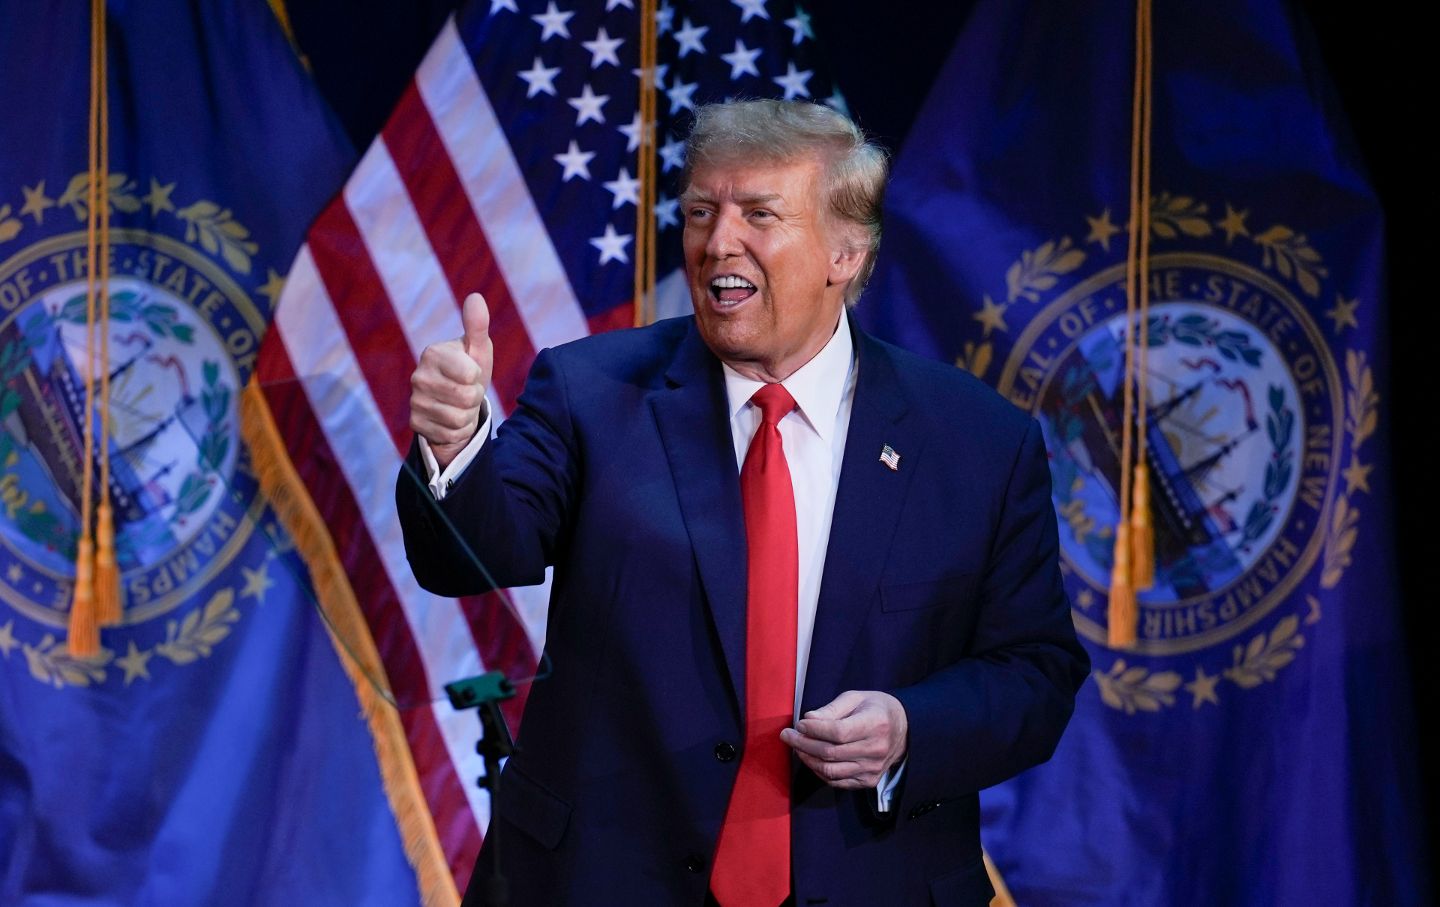 Republican presidential candidate former President Donald Trump gives a thumbs up after speaking at a campaign event in Rochester, N.H., Sunday, Jan. 21, 2024.